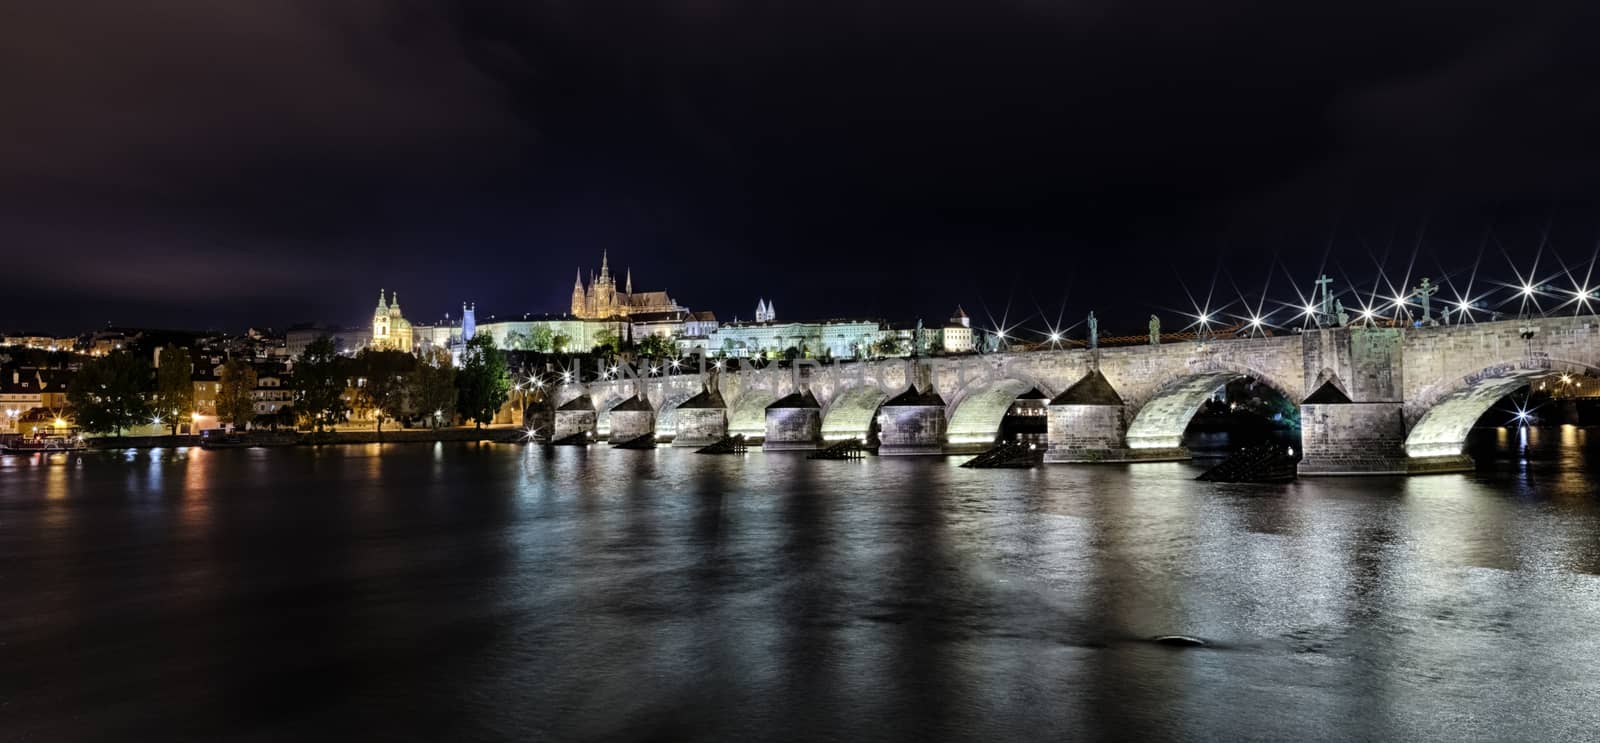 The Prague Castle and Charles bridge in the night